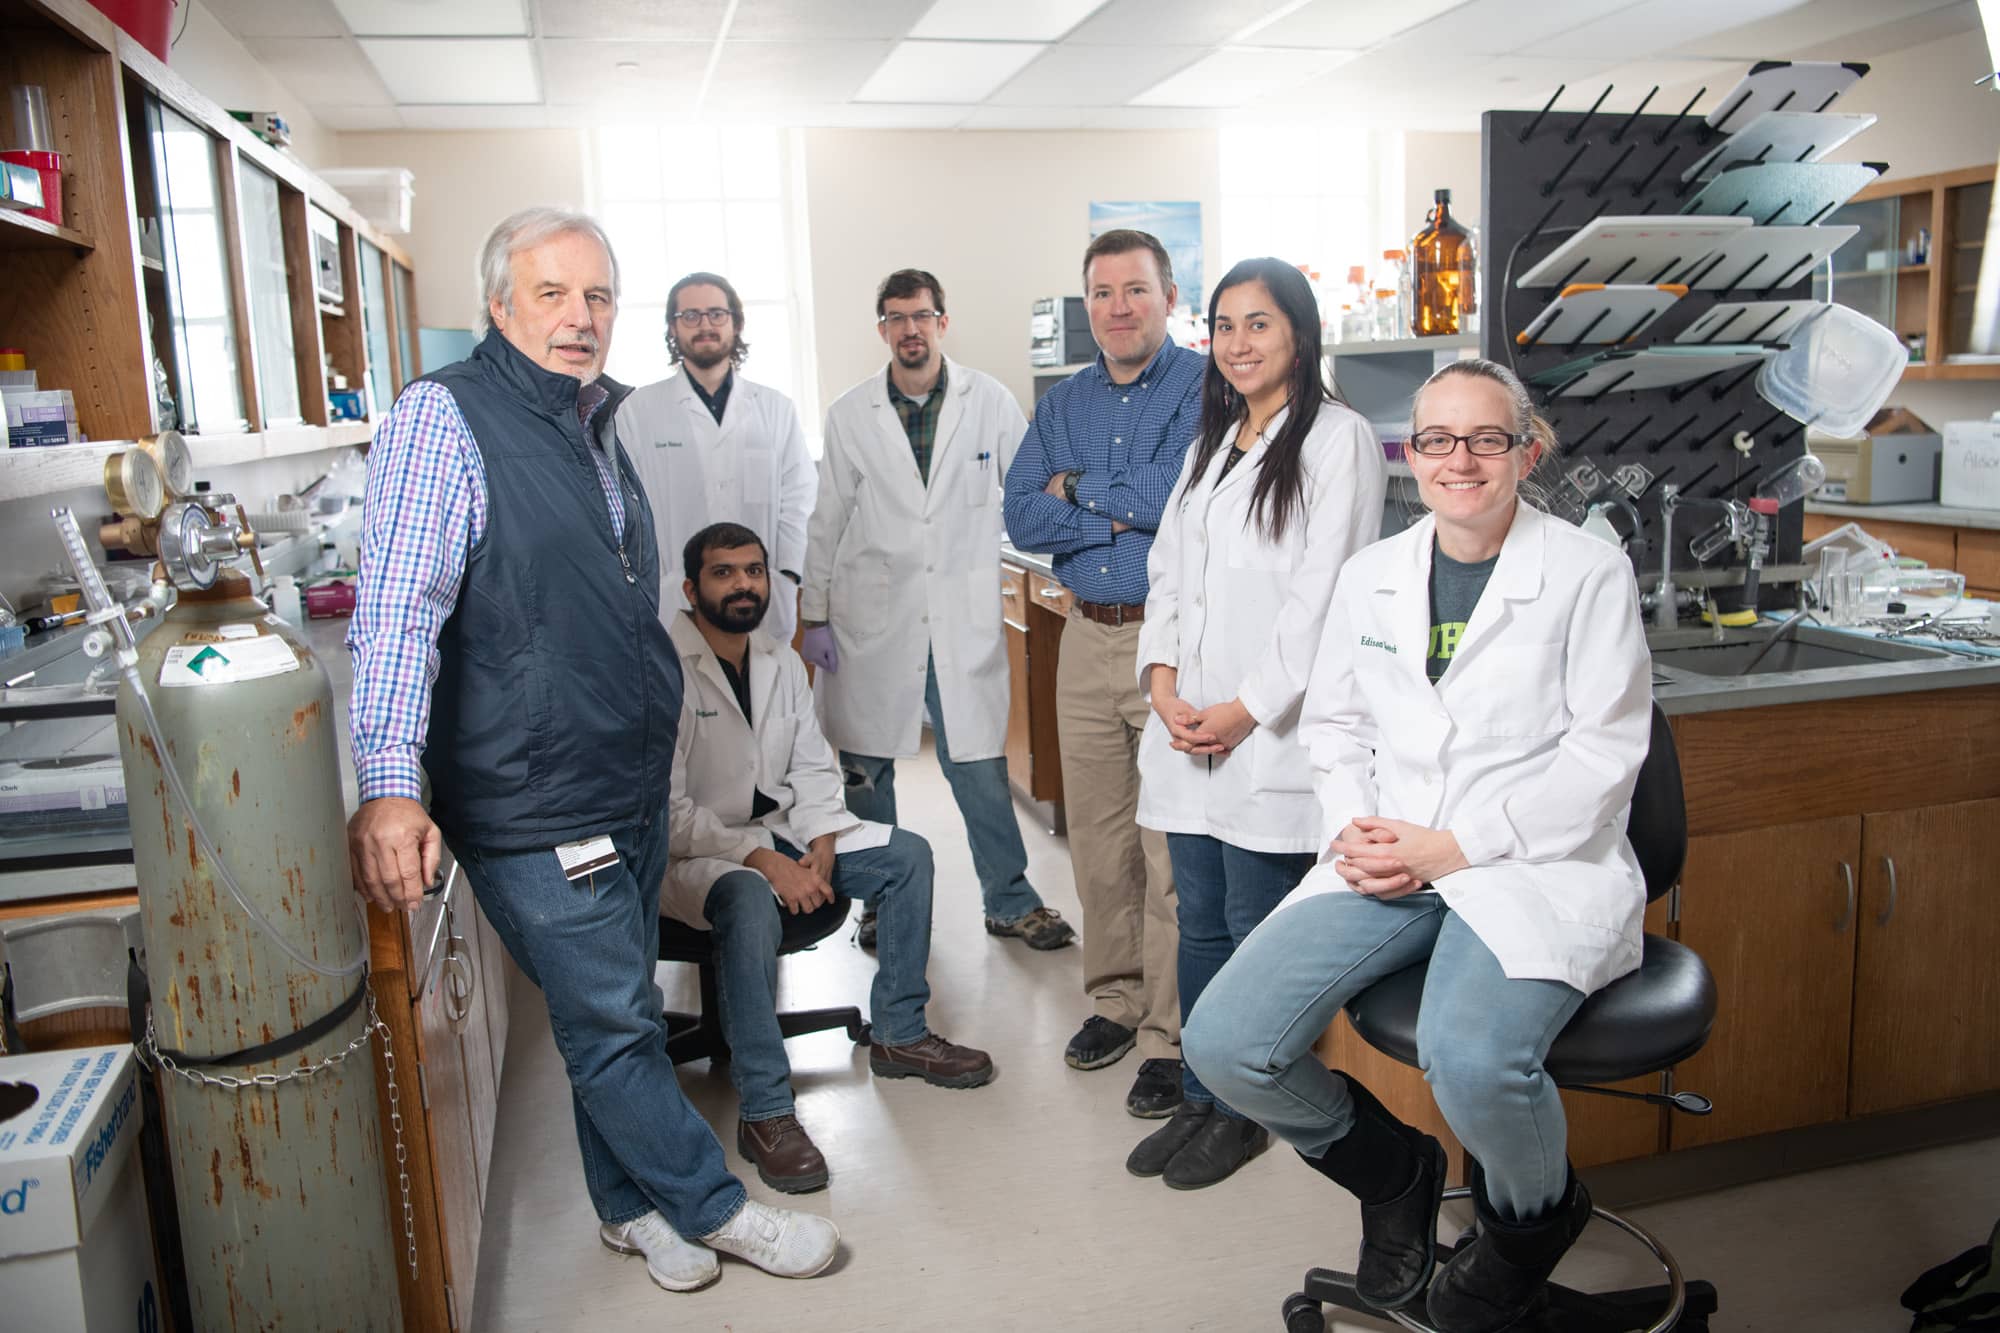 Dr. John Kopchick poses for a photo with his team at the Edison Biotechnology Institute.